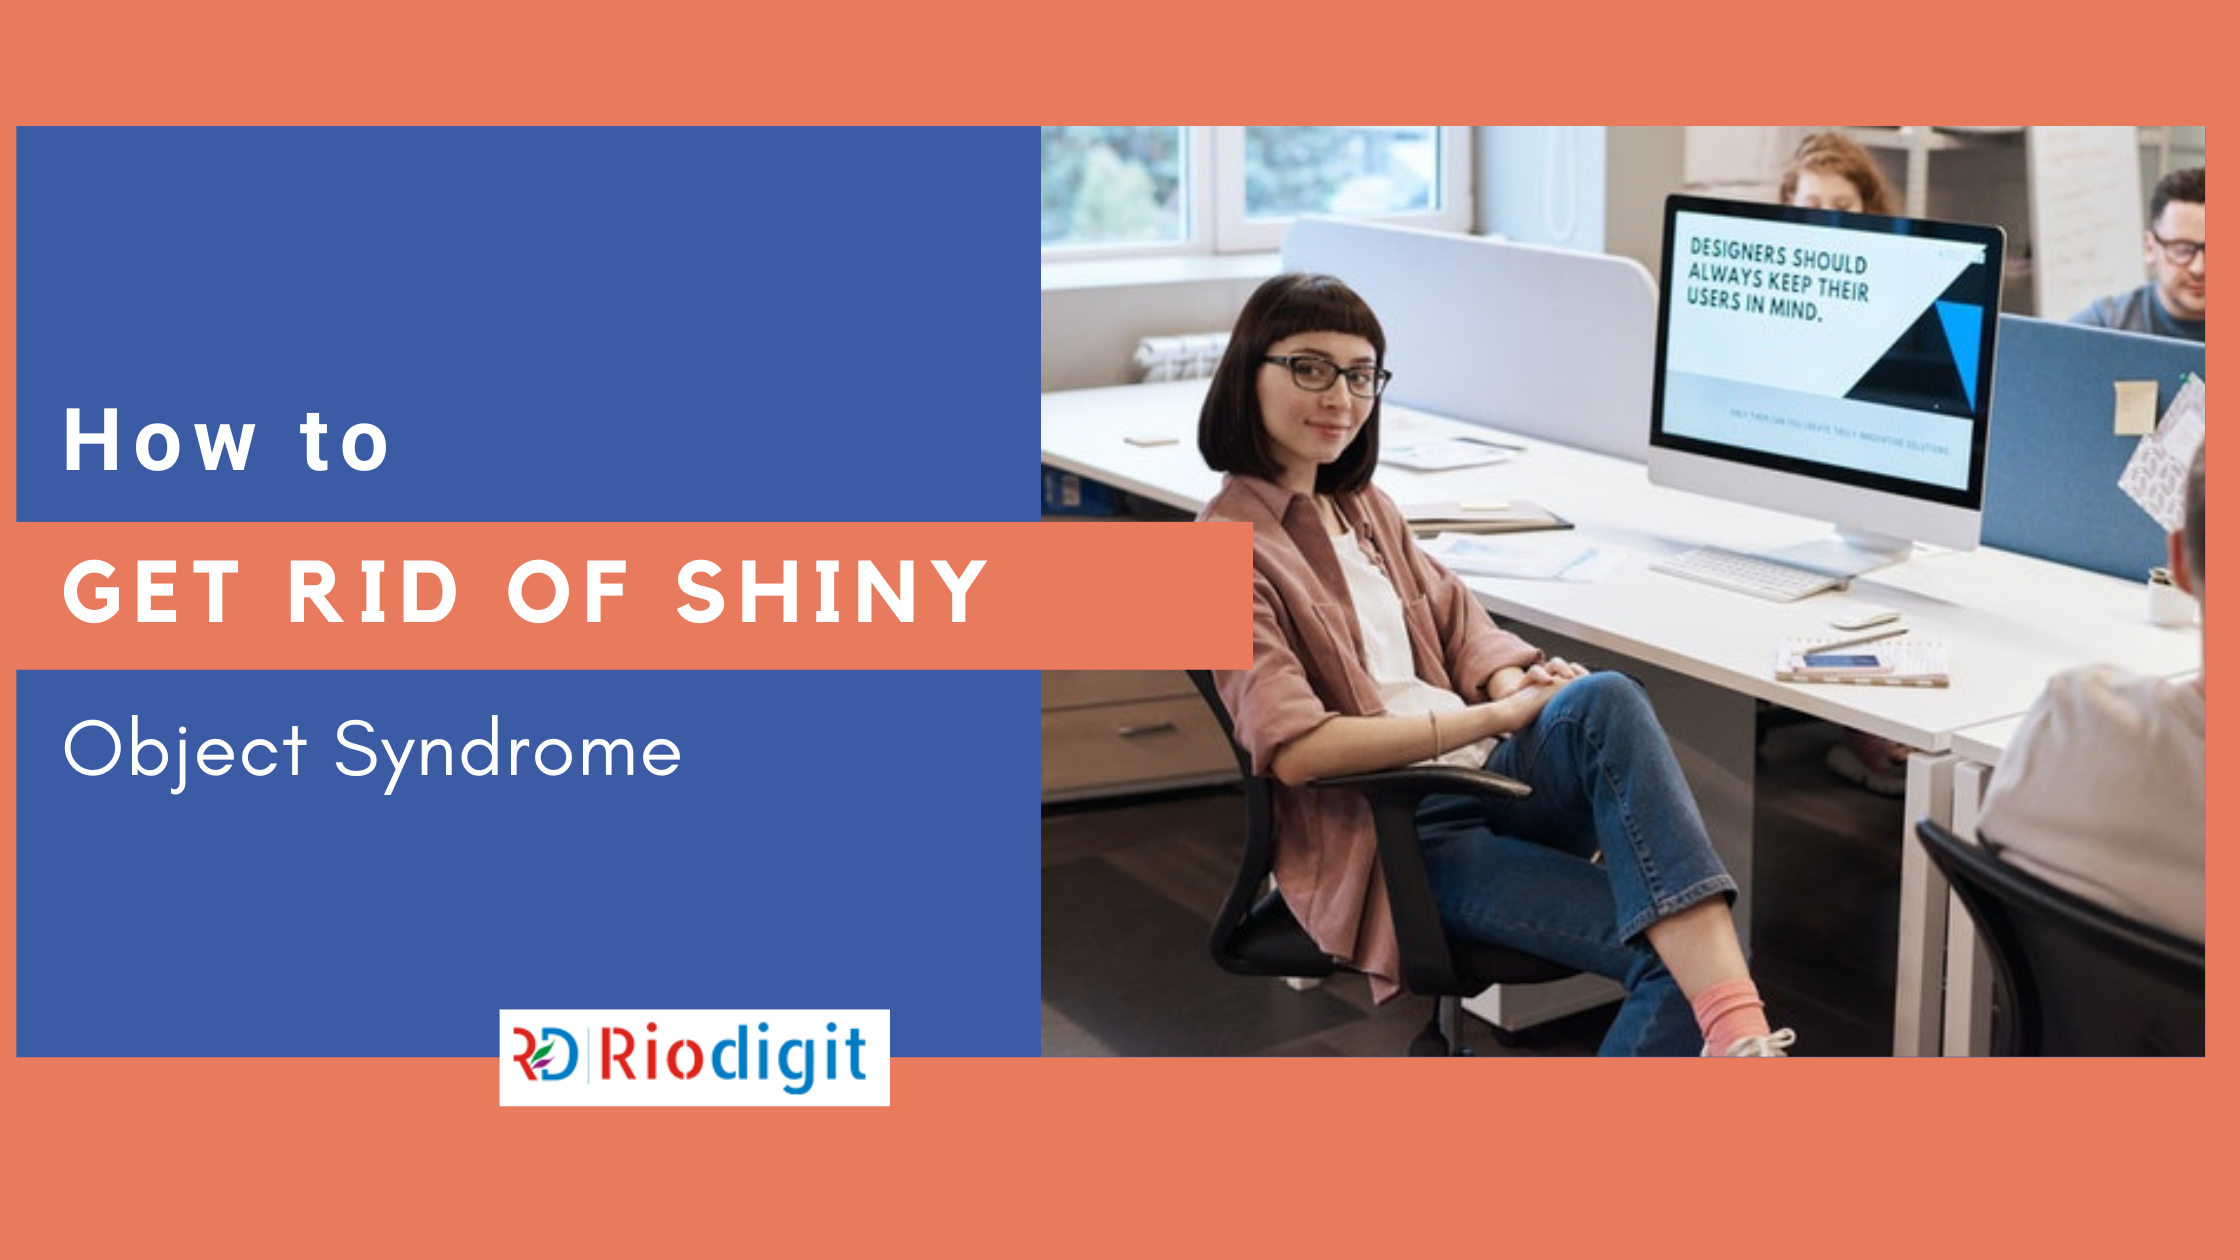 How to Get Rid of Shiny Object Syndrome